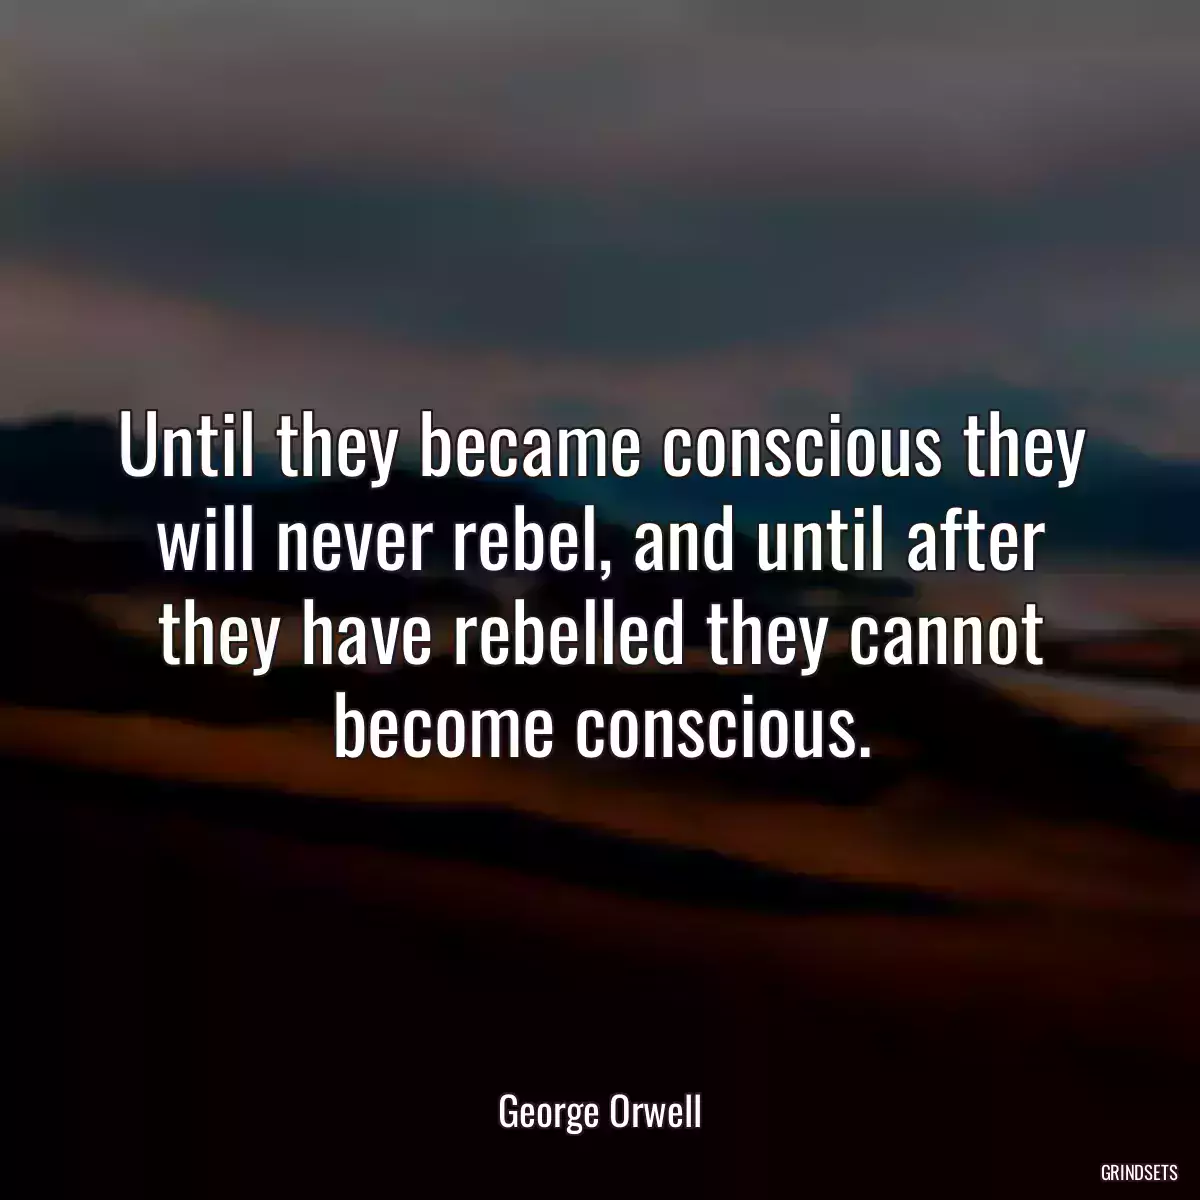 Until they became conscious they will never rebel, and until after they have rebelled they cannot become conscious.